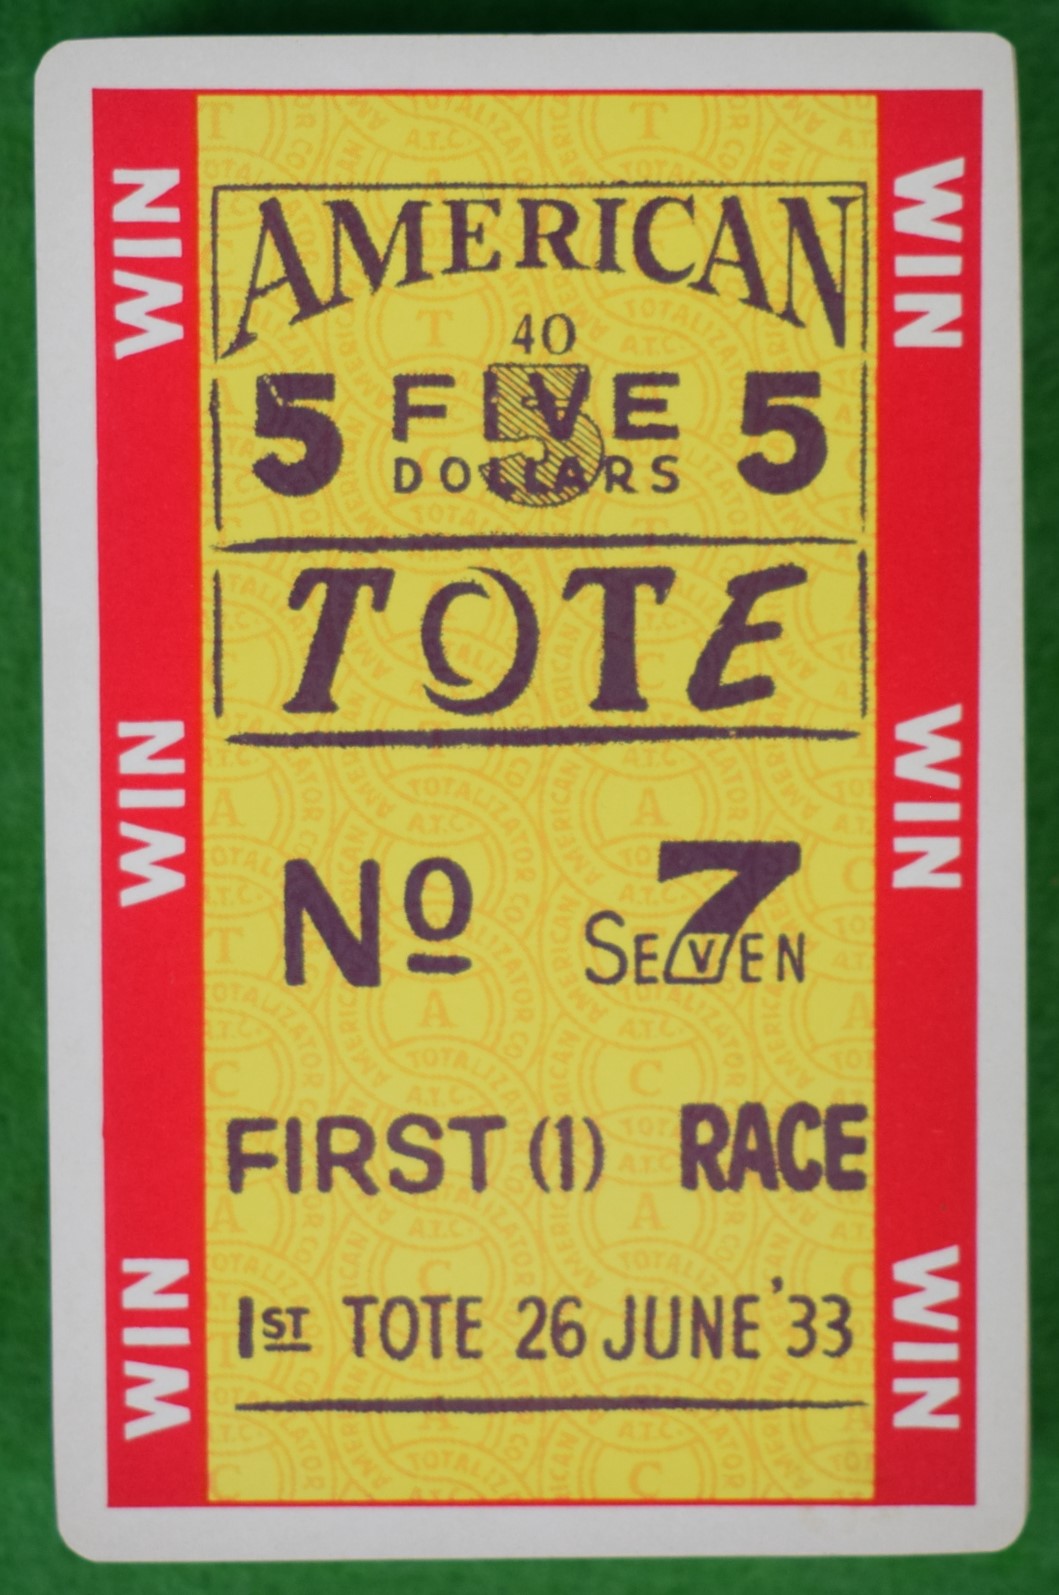 Deck x American Tote No. 7 First (1) Race Win June '33